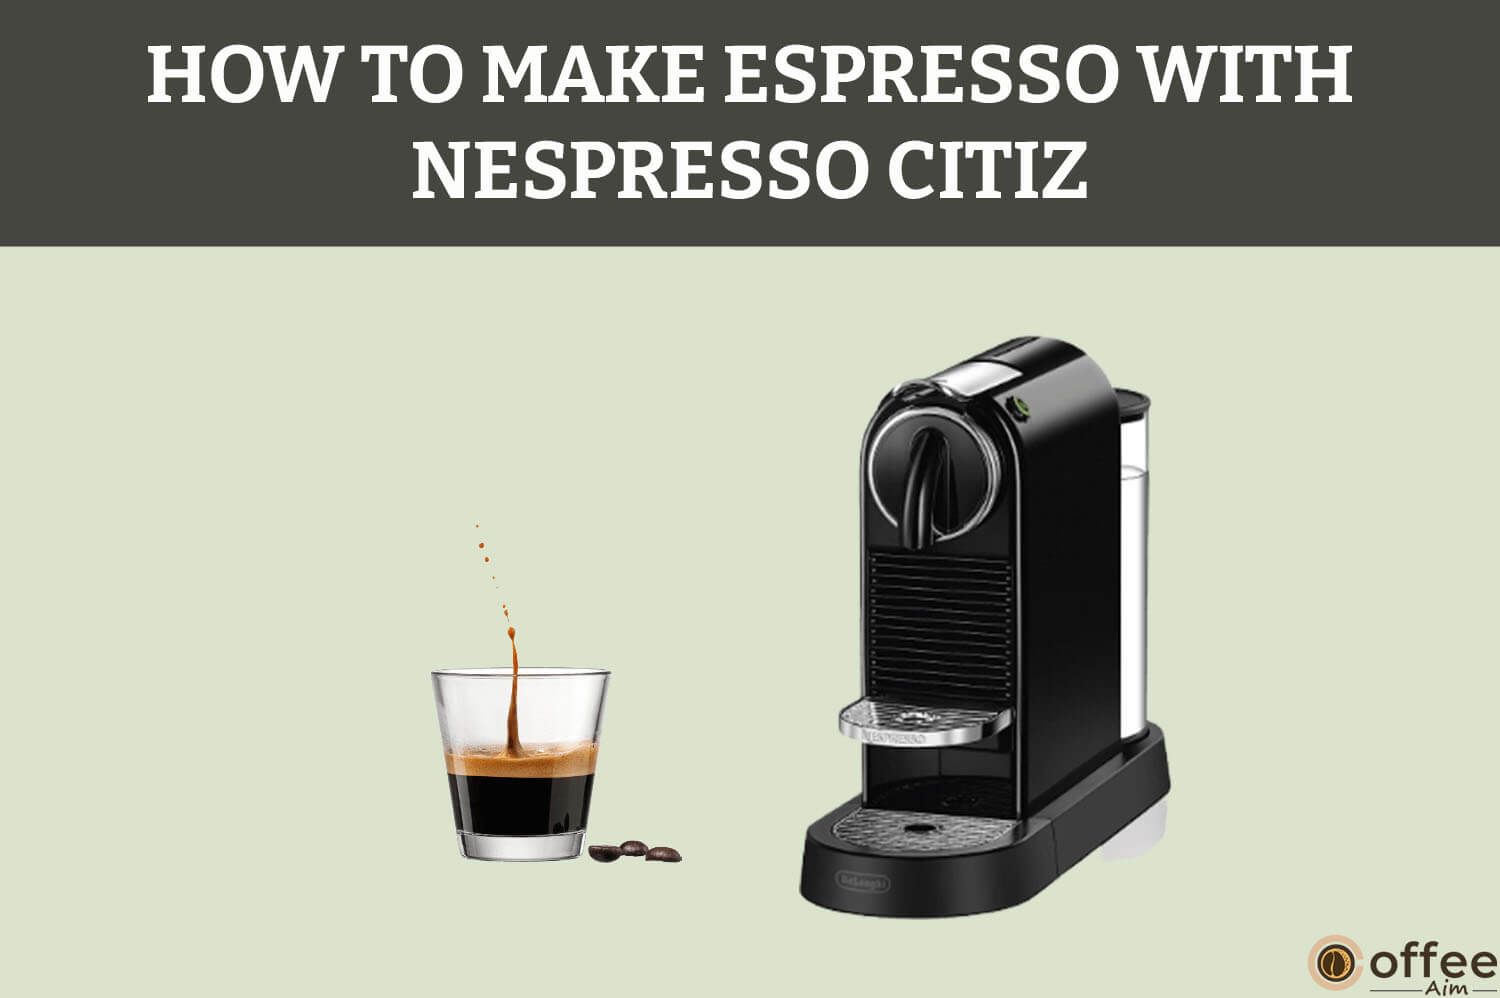 Featured image for the article "How To Make Espresso With Nespresso Citiz"